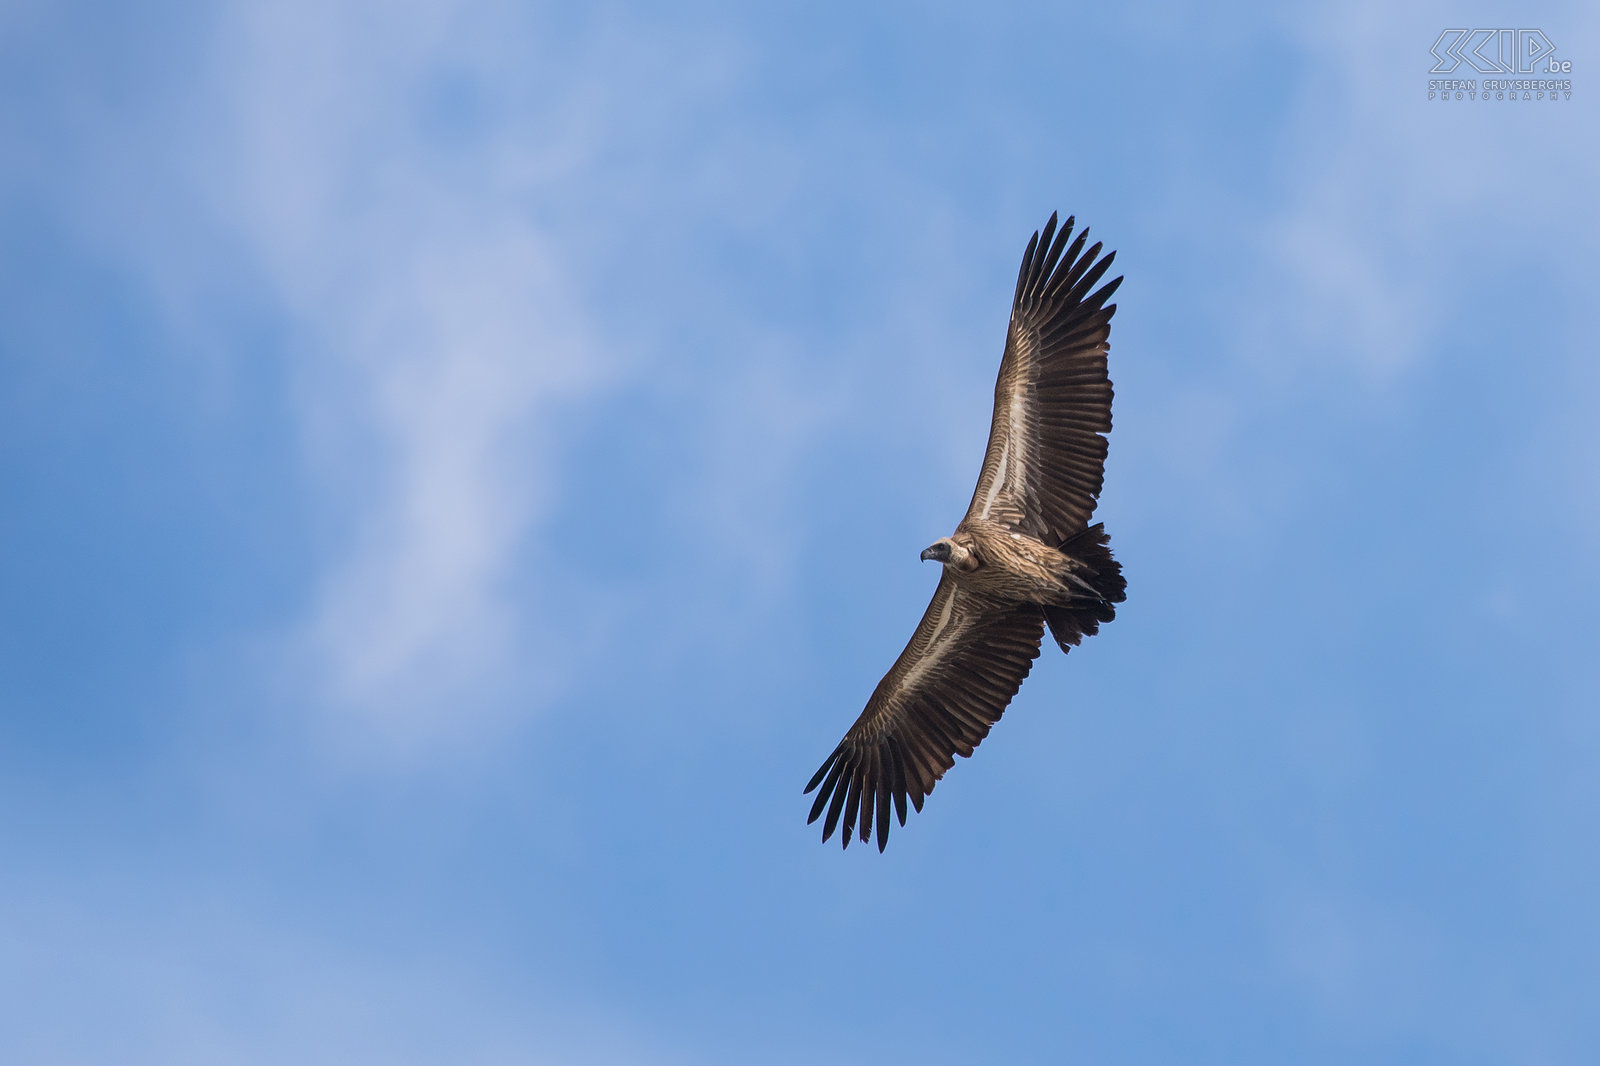 Lower Zambezi - White-backed vulture A white-backed vulture (Gyps africanus) flying above the Zambezi river. An adult white-backed vulture can be  94cm long and can have a wingspan of 218cm. Stefan Cruysberghs